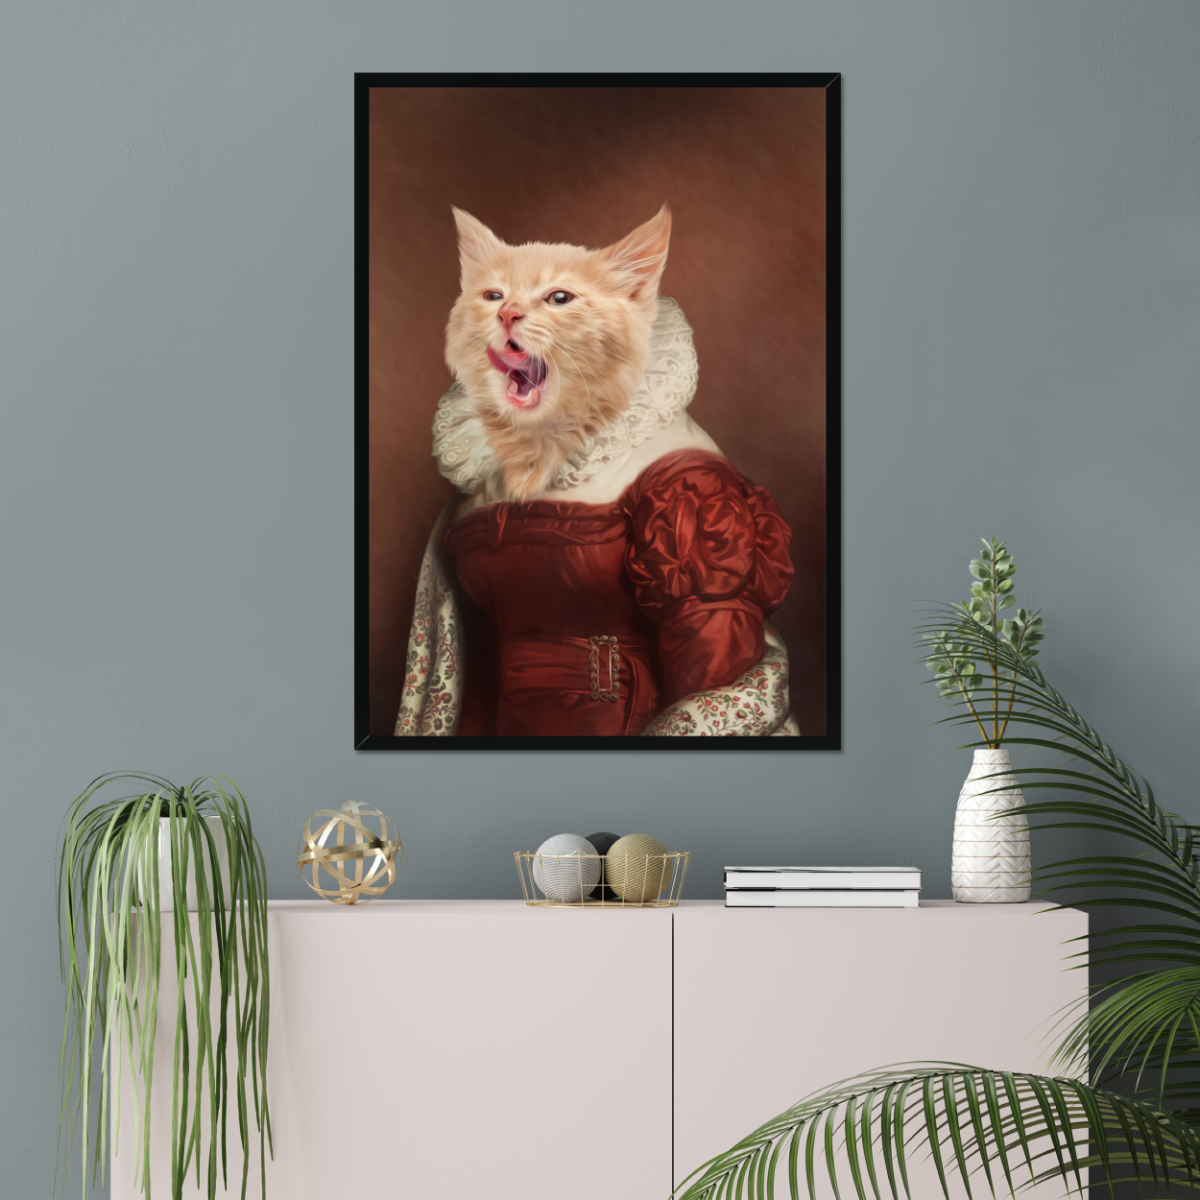 The Countryside Girl: Custom Pet Portrait - Paw & Glory, paw and glory, draw your pet portrait, pet portraits, fancy pet portraits, custom pet portraits south africa, paintings of pets from photos, drawing dog portraits, pet portraits